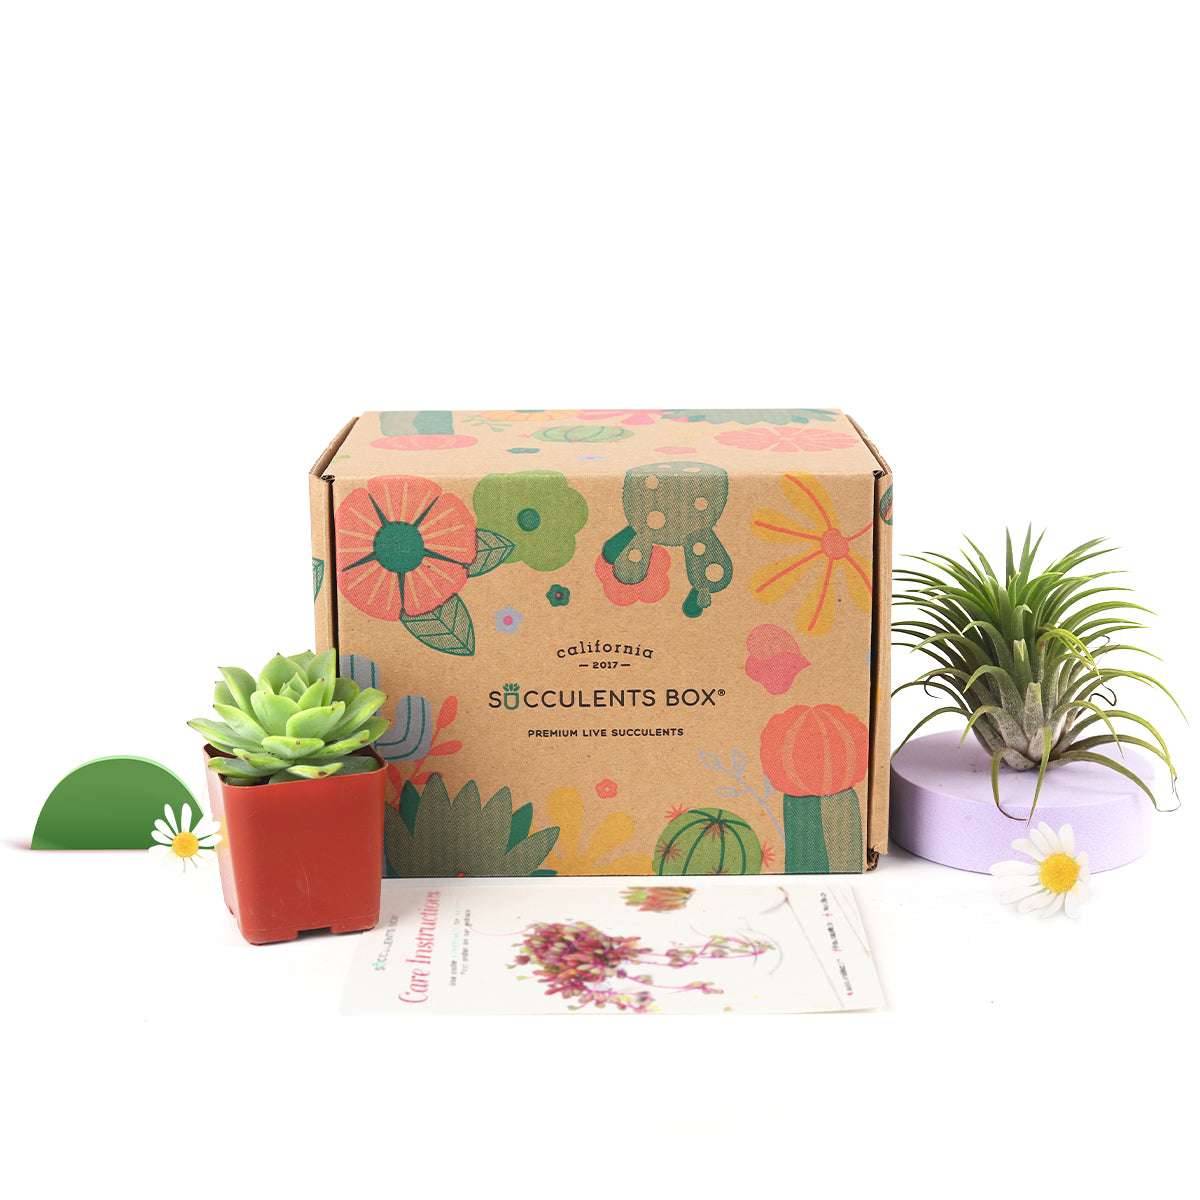 Succulent subscription box delivered monthly, Succulent subscription gift for sale, airplants subscription box monthly